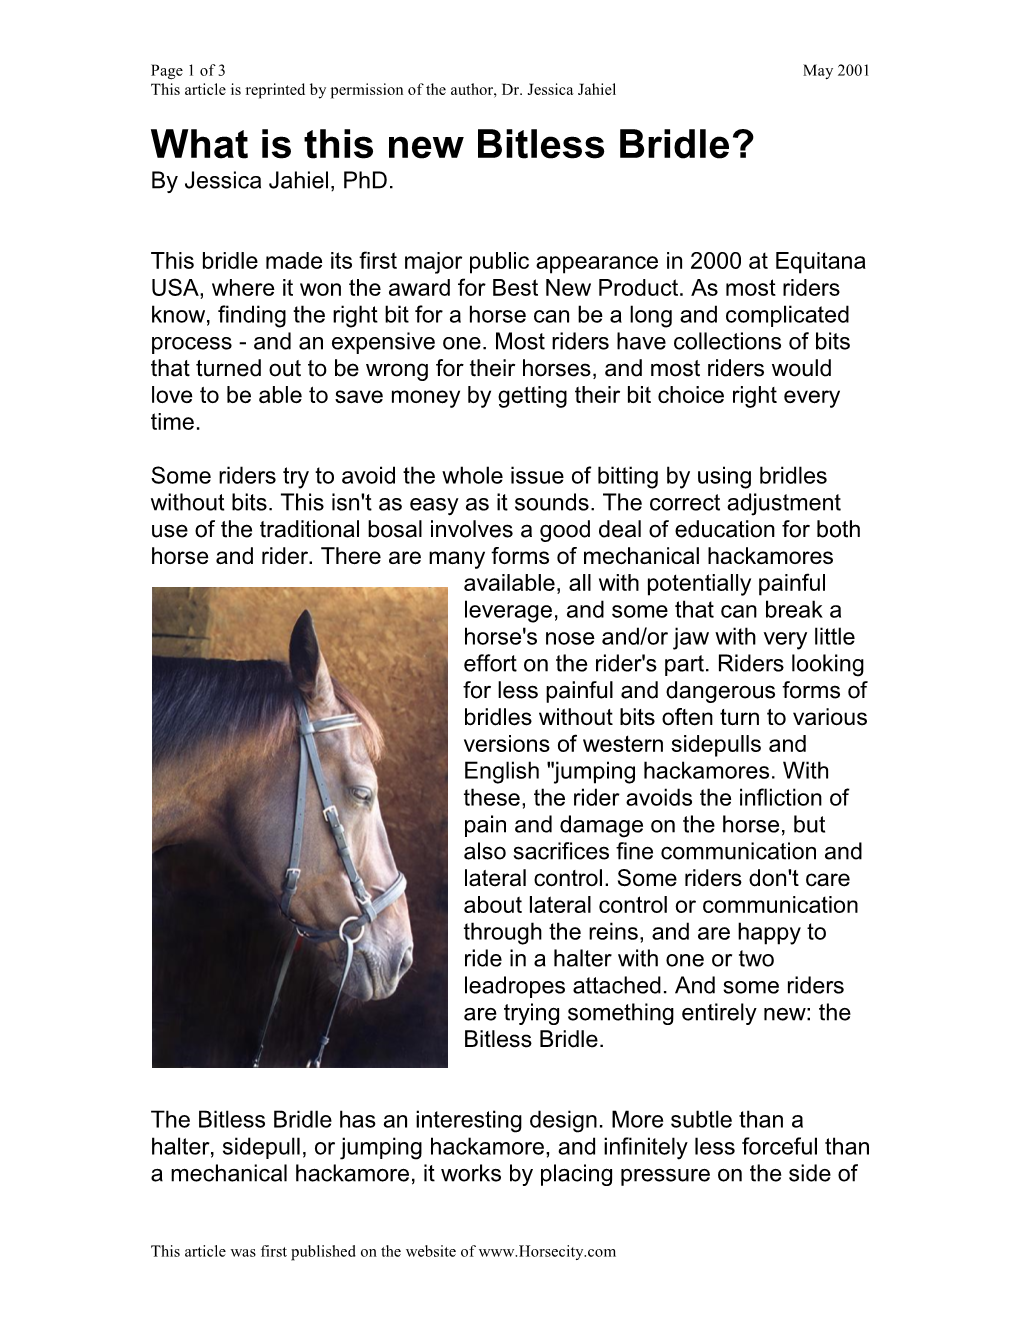 What Is This New Bitless Bridle? by Jessica Jahiel, Phd